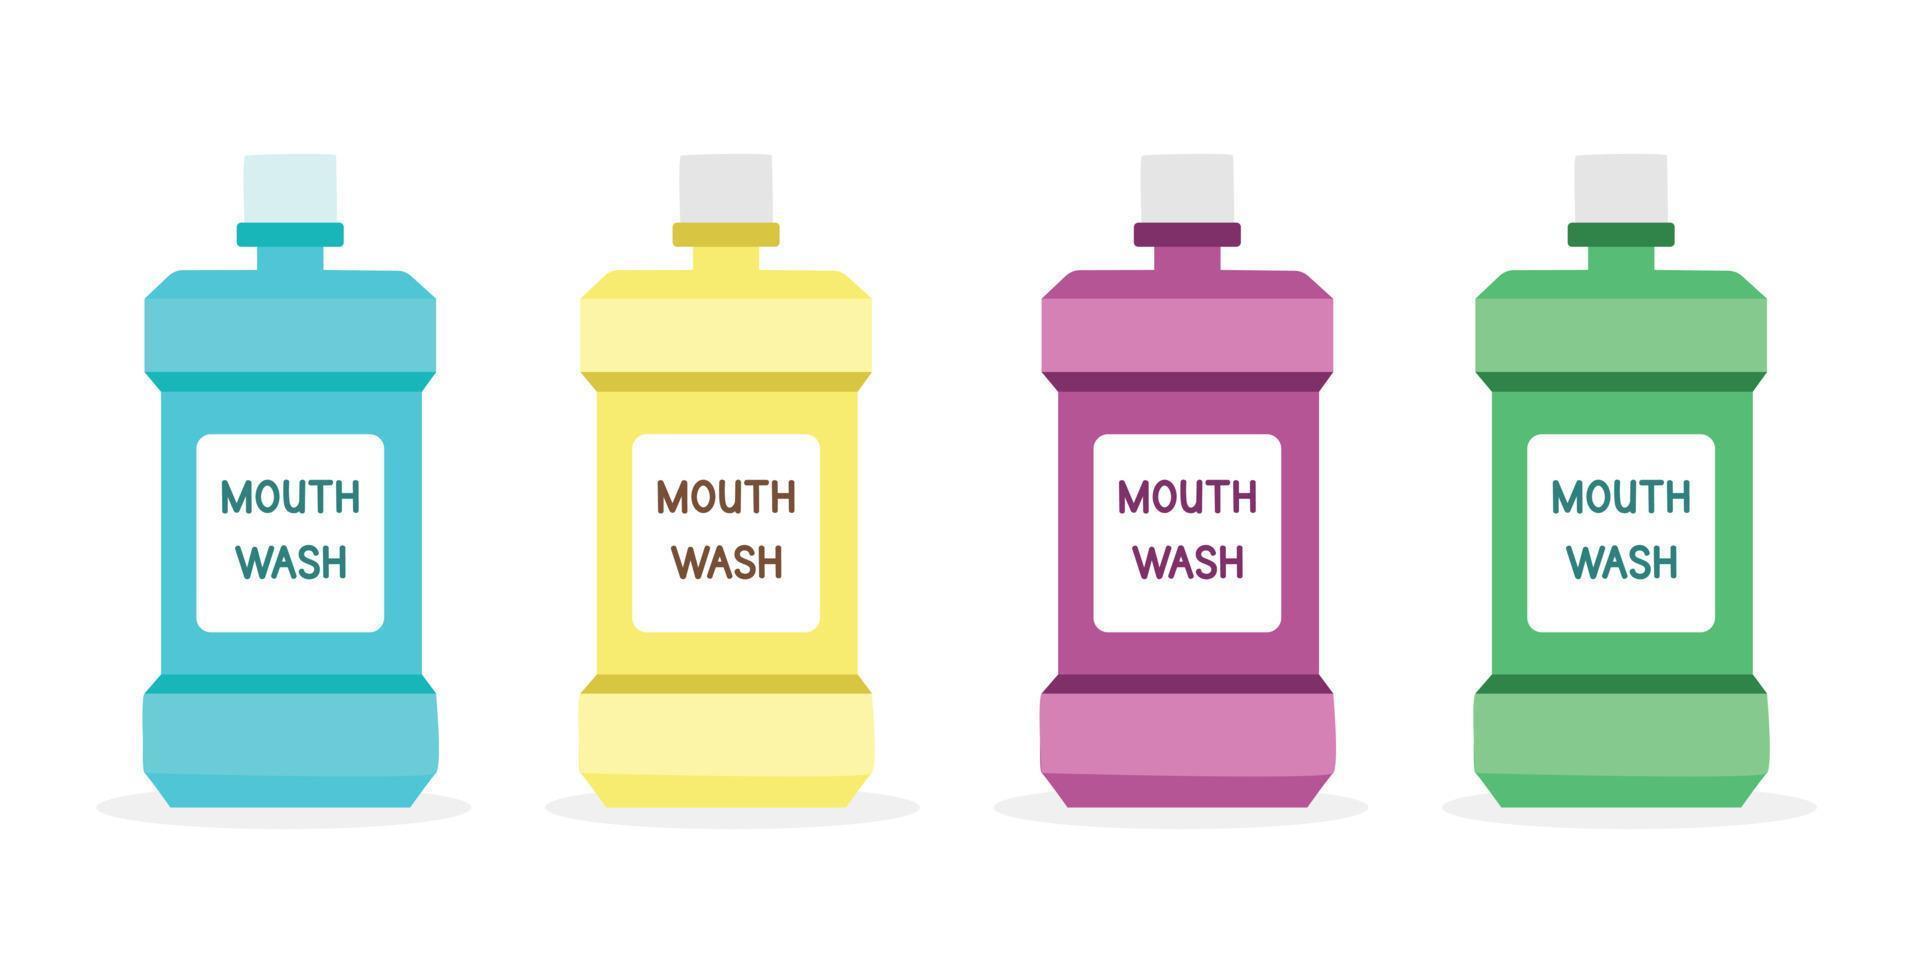 Set of multicolored mouthwash bottles in flat-style vector illustration. Simple plastic mouth wash package for rinsing mouth clipart cartoon style. Oral care product concept vector illustration